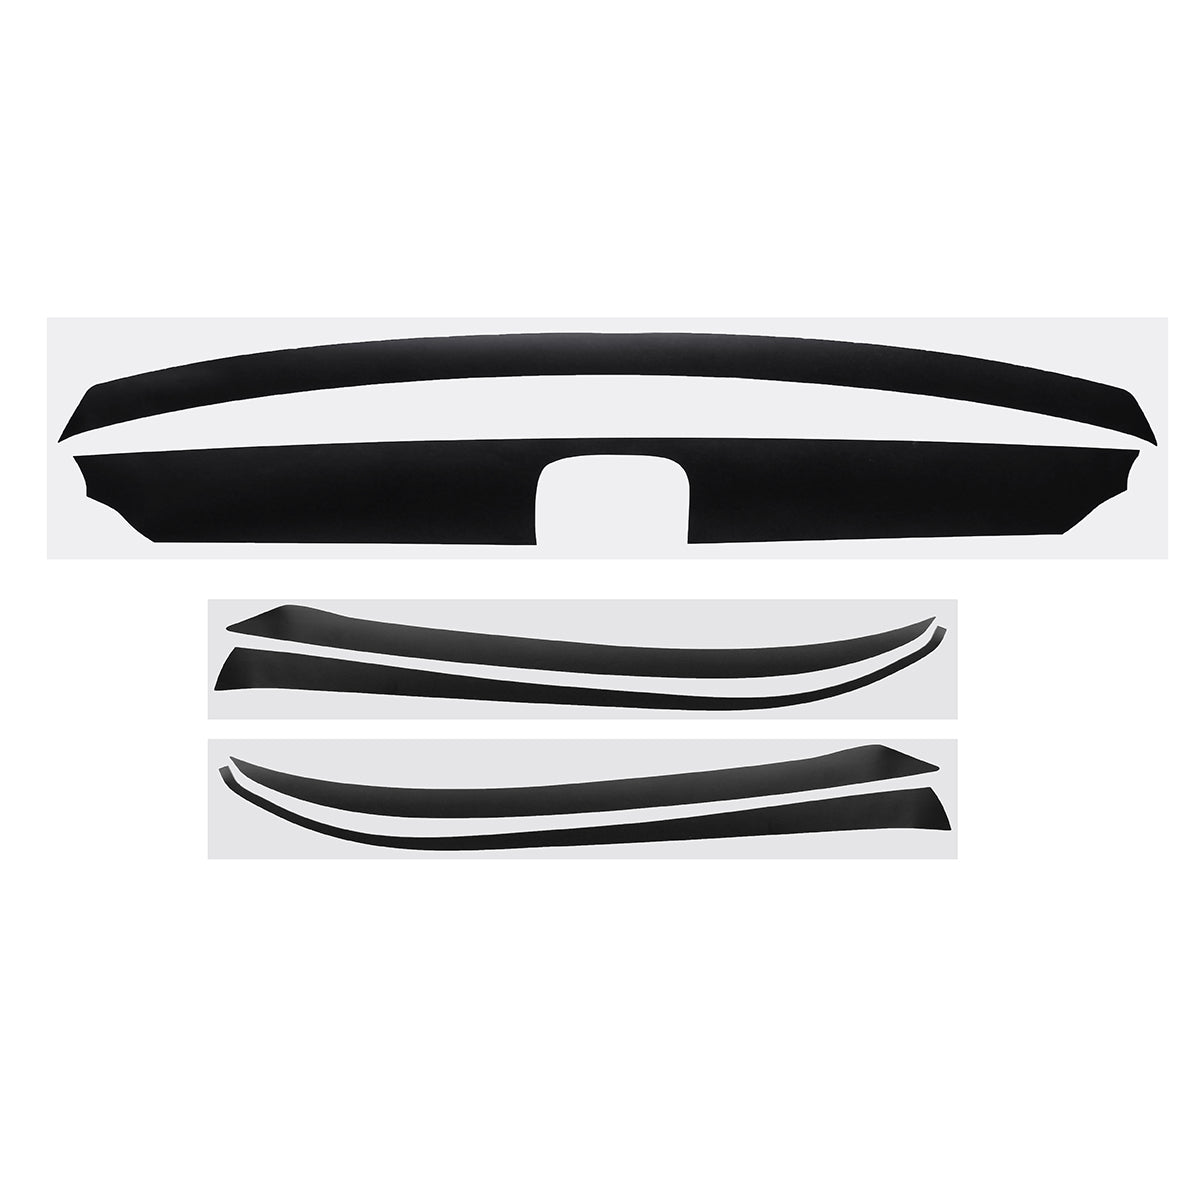 Black For 2018 Hondas Accord 10th 4 Door Front Grill Grille Trim Sticker Decals